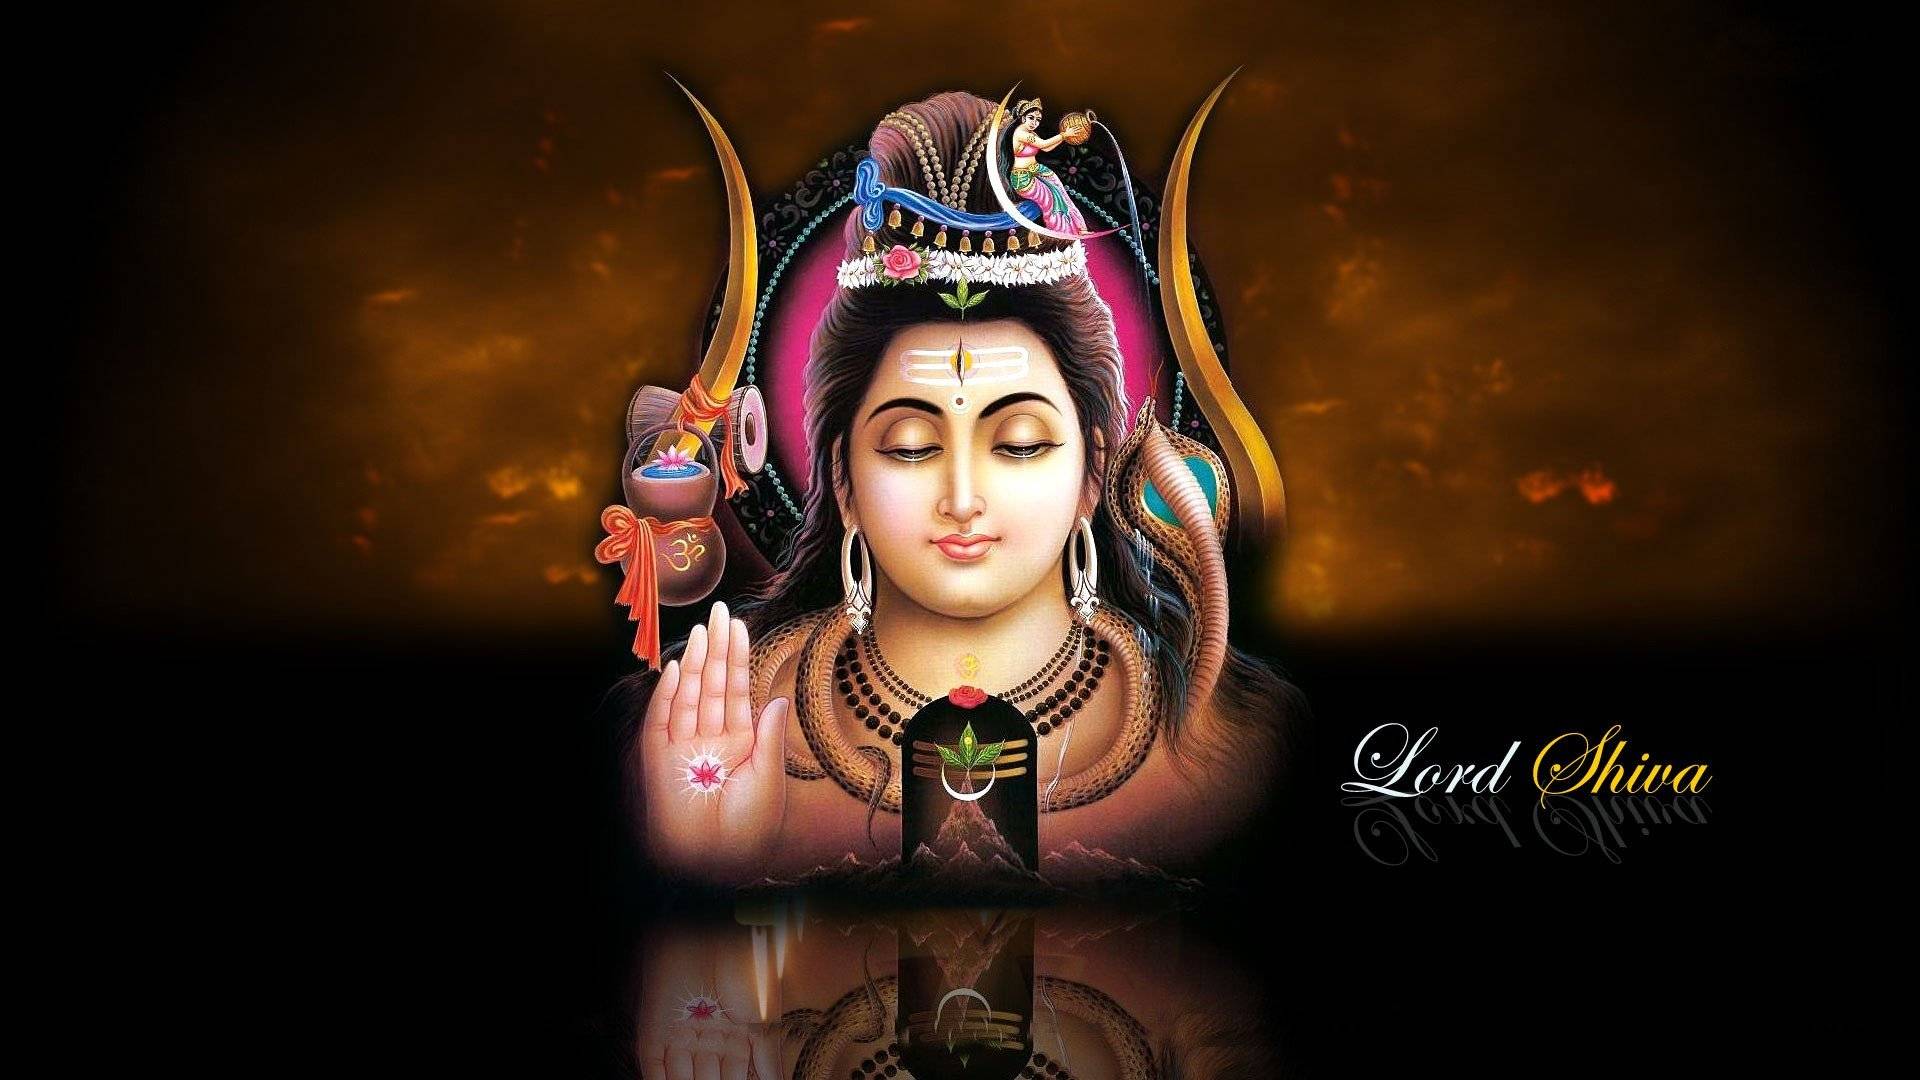 Lord Shiva Wallpapers - Wallpaper Cave